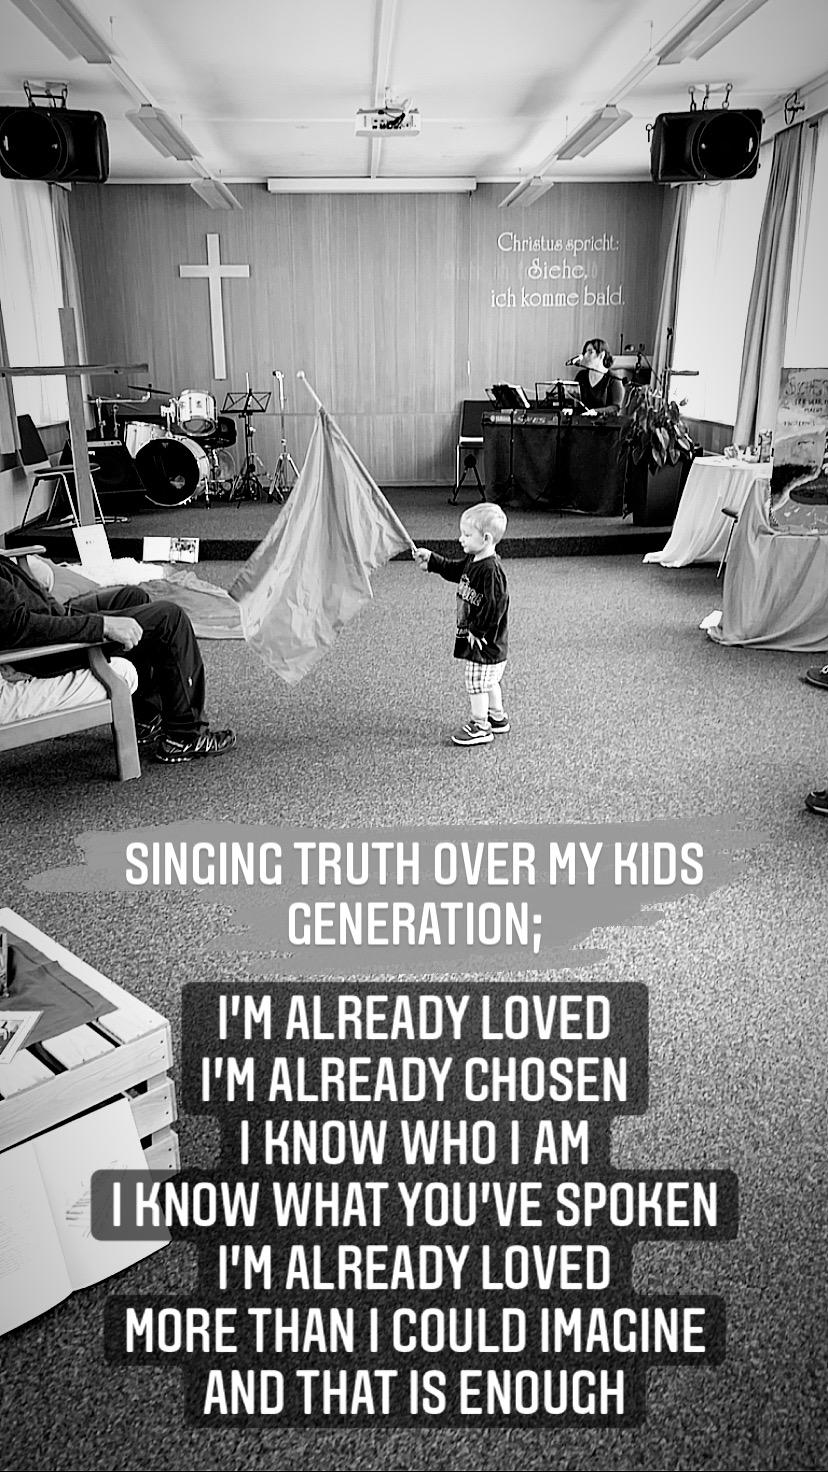 Singing truth over my kids generation